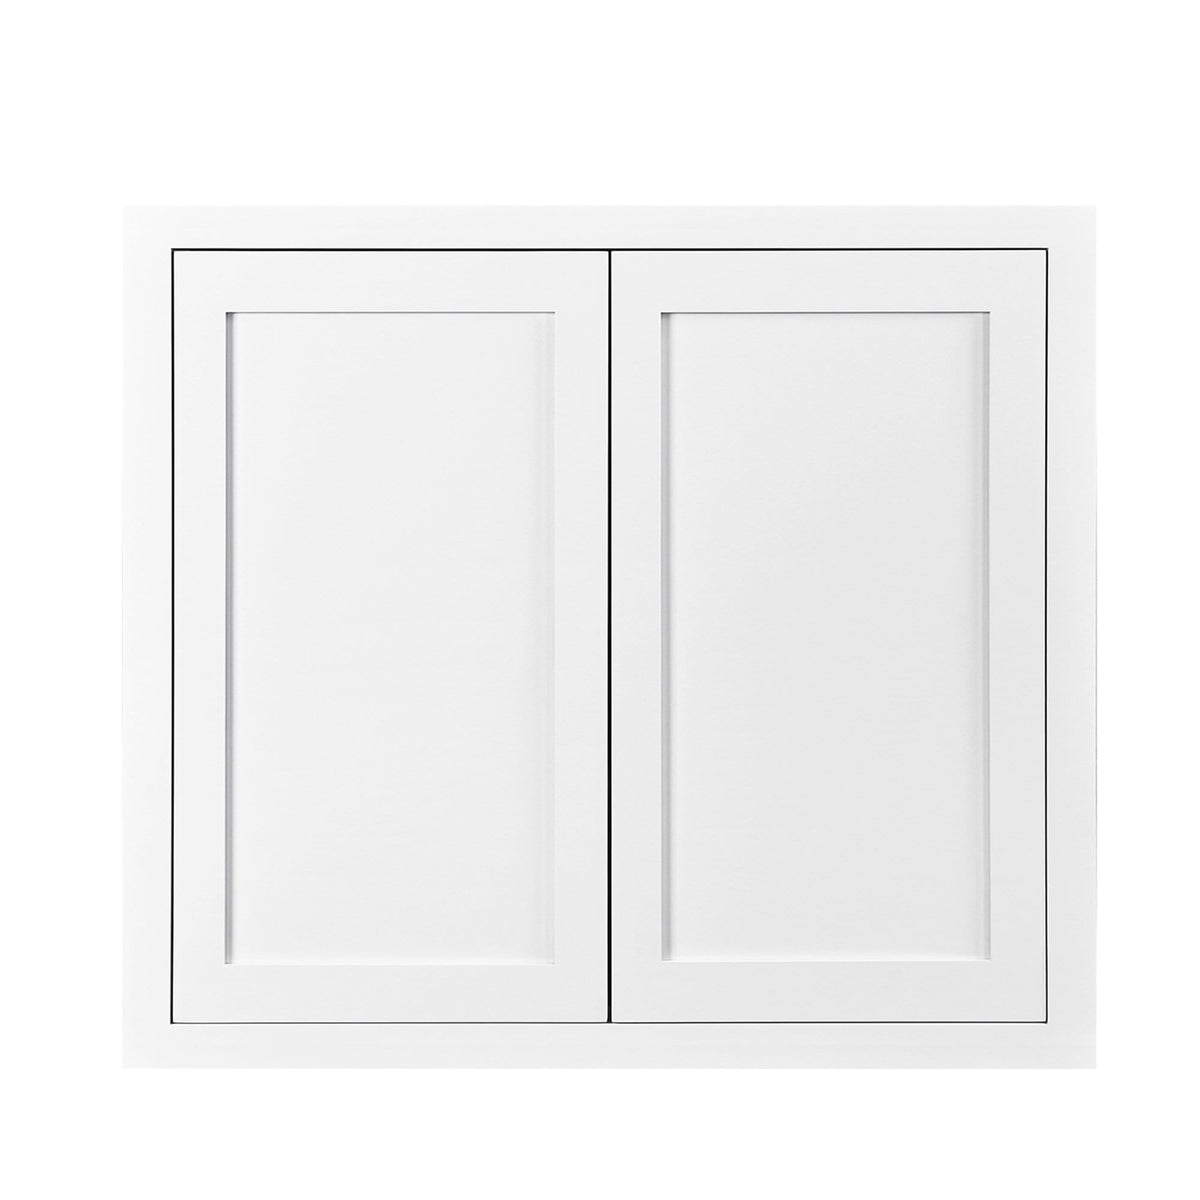 30" Tall Snow White Inset Shaker Wall Cabinet - Double Door 24", 27", 30", 33" & 36"